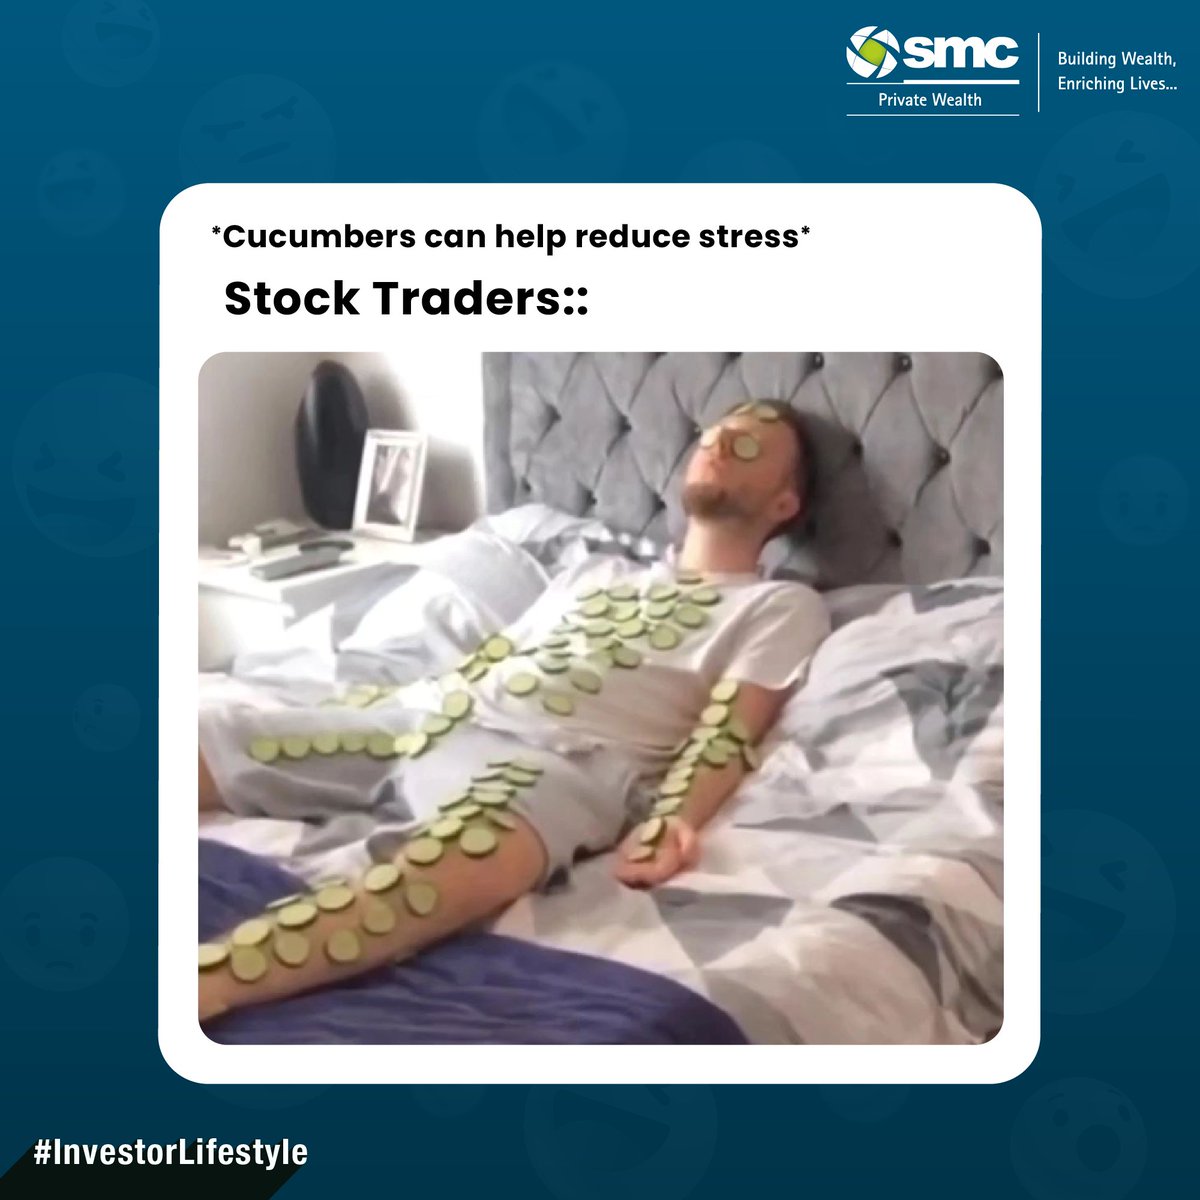 Tag your trader friend and ask for a cucumber🥒
.
.
.
.
.
.
.
#SMCPrivateWealth #InvestorLifestyle #WealthManagementIndia #WealthIndia #StocksIndia #InvestmentIndia #InvestorMemes  #FinanceMemes #MemesIndia2023 #TradingIndia #TraderMemes #StockMemes  #TraderLife #TraderMemes2023